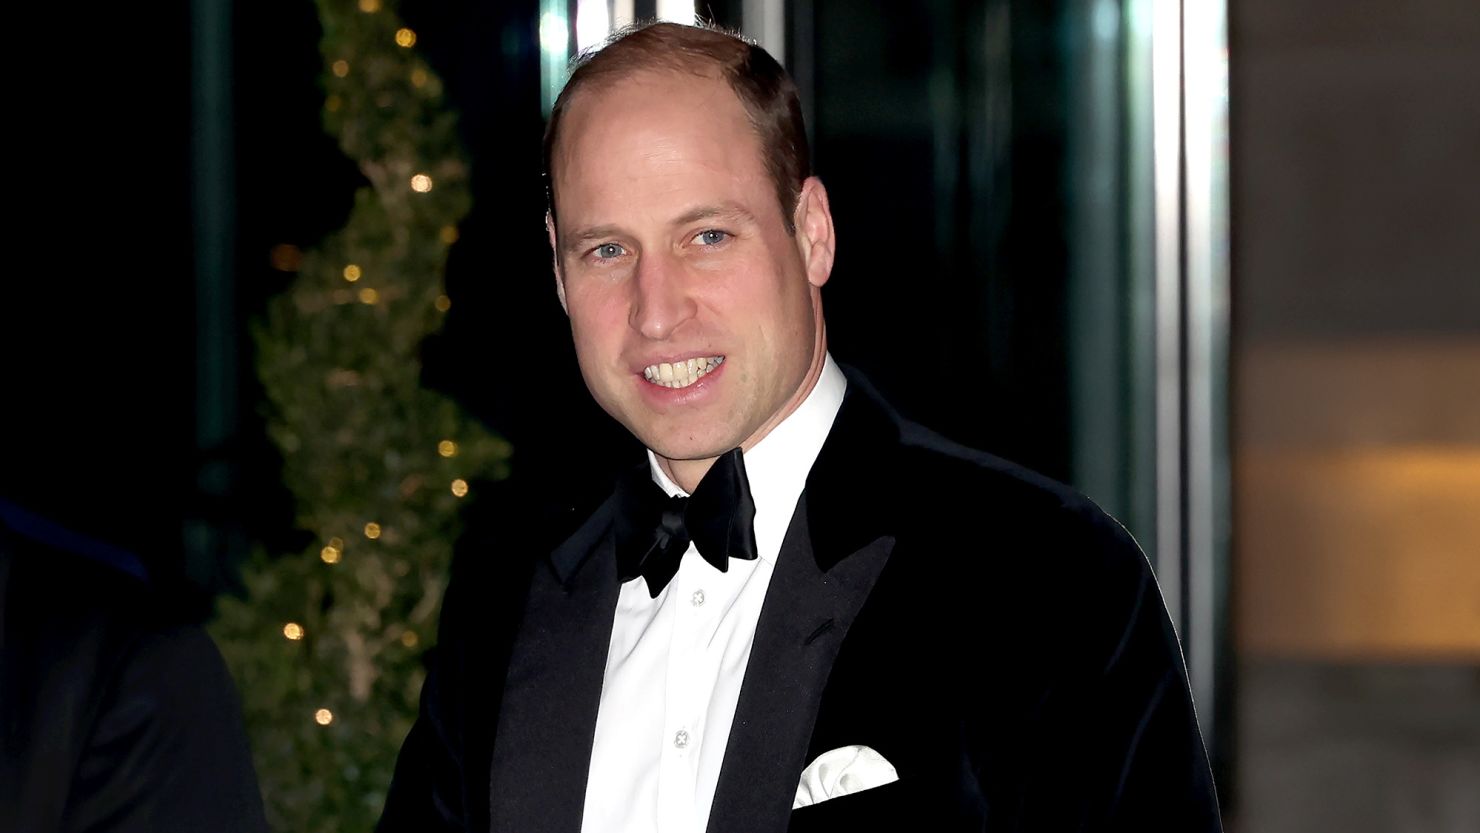 Prince William resumed his royal work on Wednesday, hosting an investiture ceremony at Windsor and later attending a gala dinner in London.